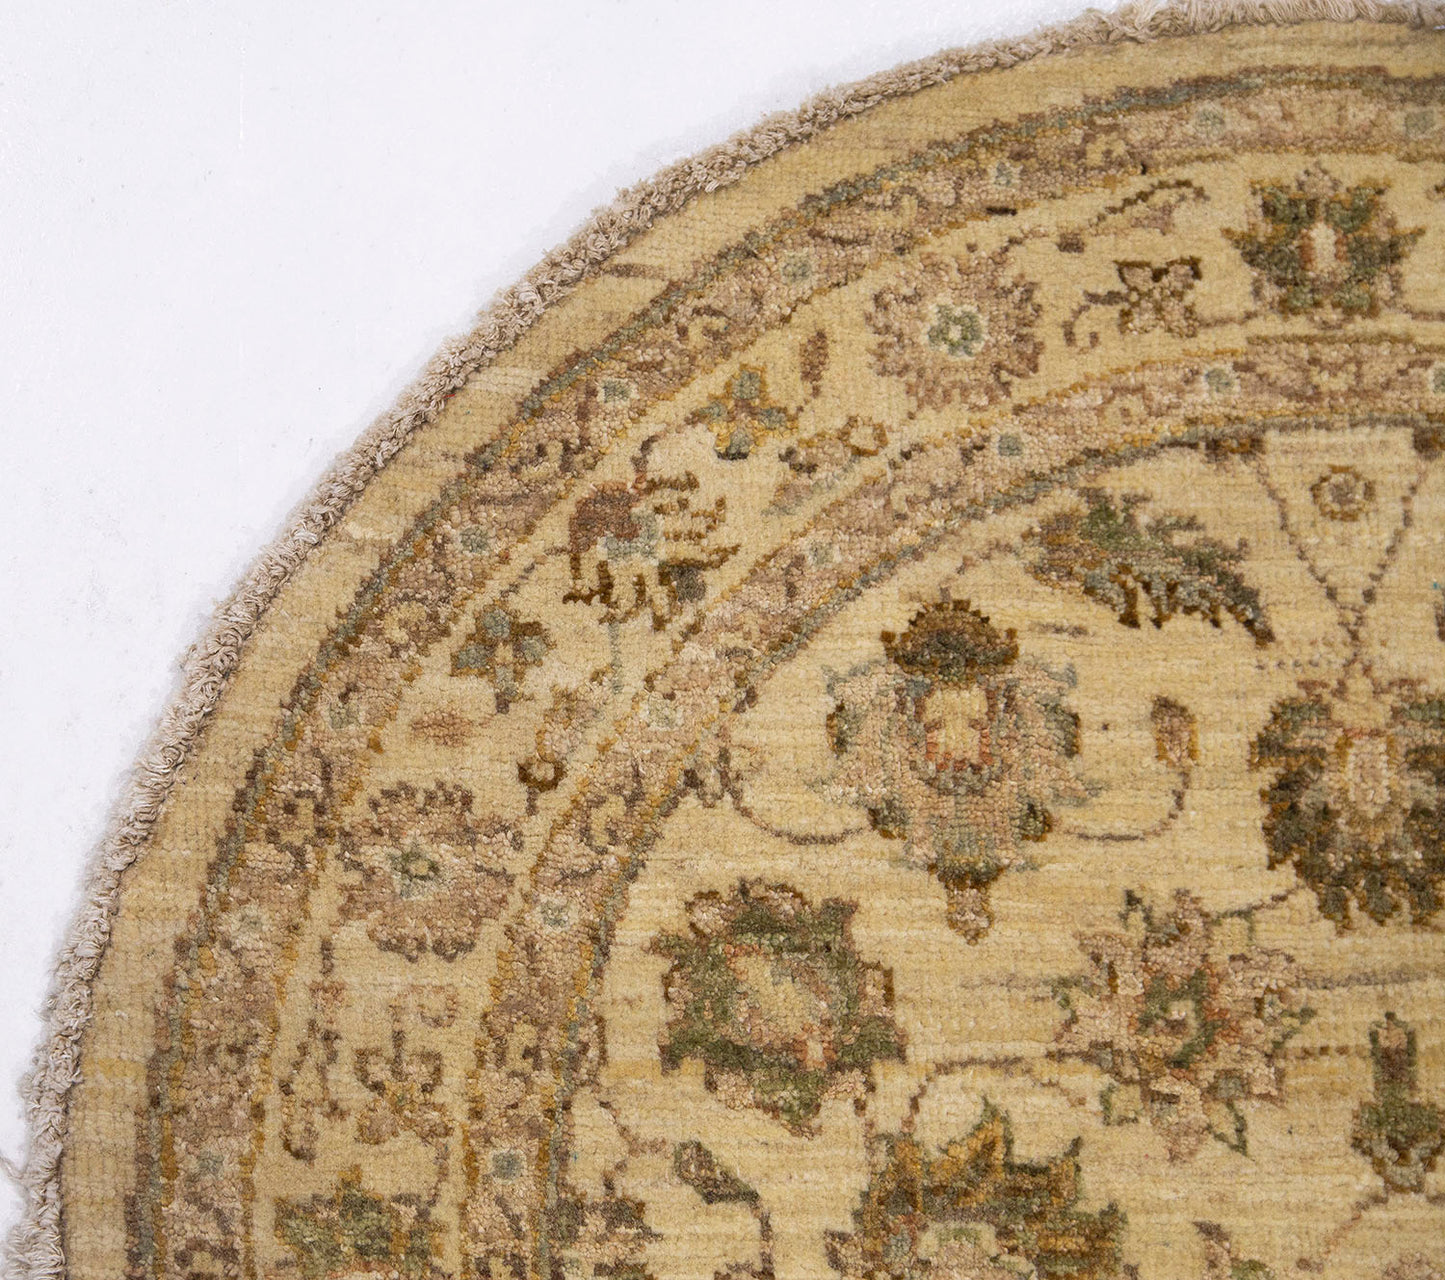 Hand-Knotted Oushak Carpet 3'.1" X 3'.1" Traditional, Ivory Fine Wool Round Rug 3x3